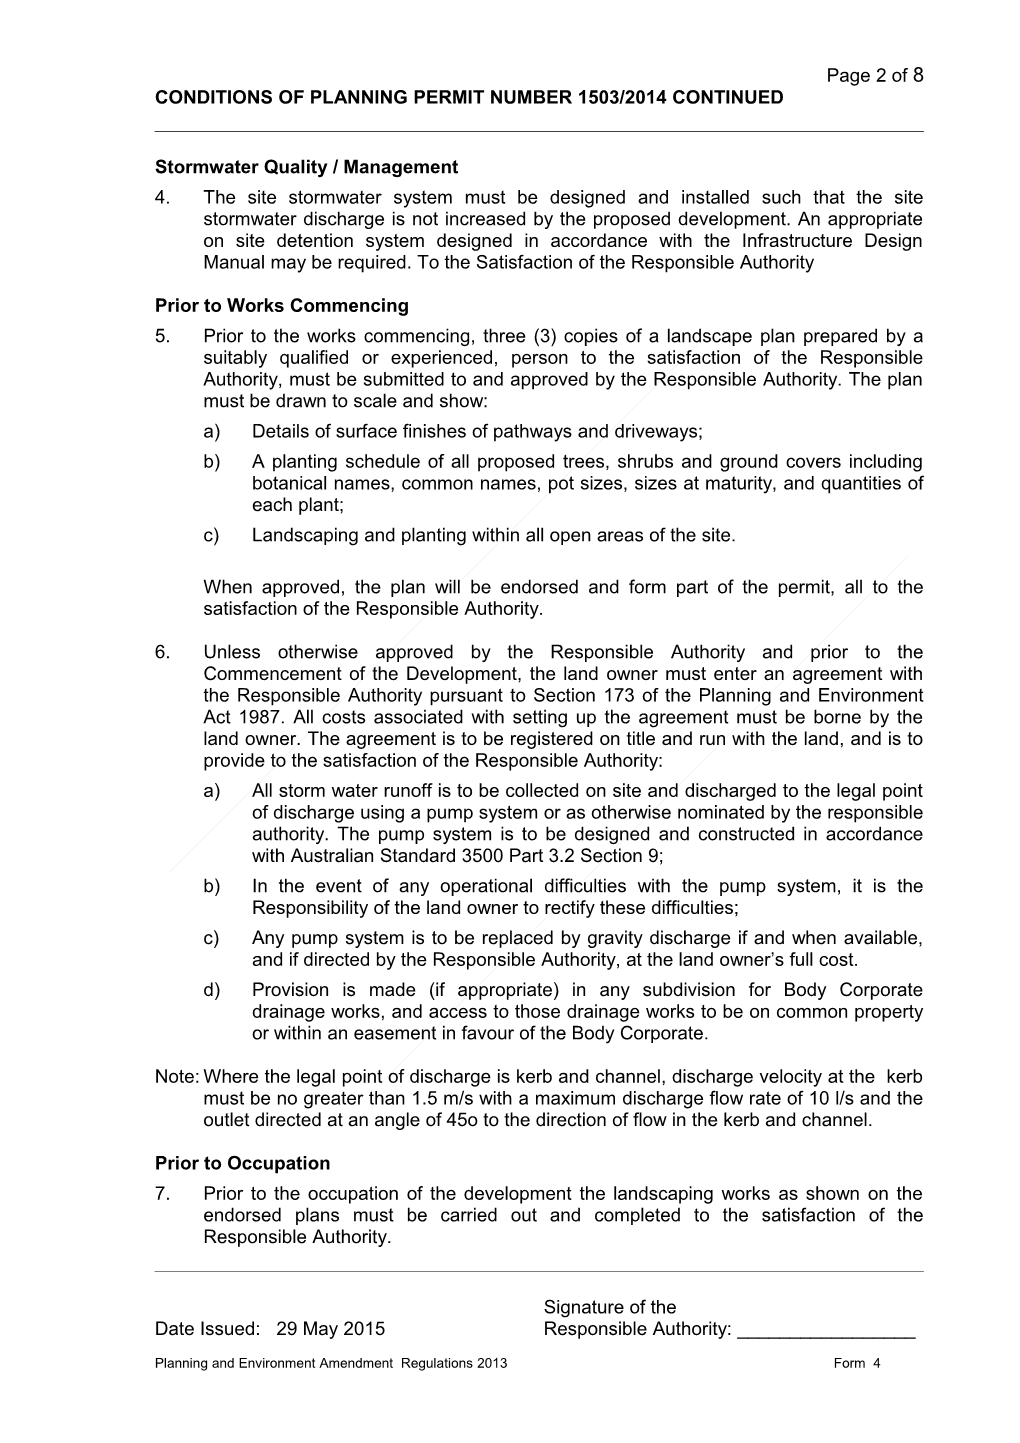 Conditions of Planning Permit Number 1503/2014 Continued